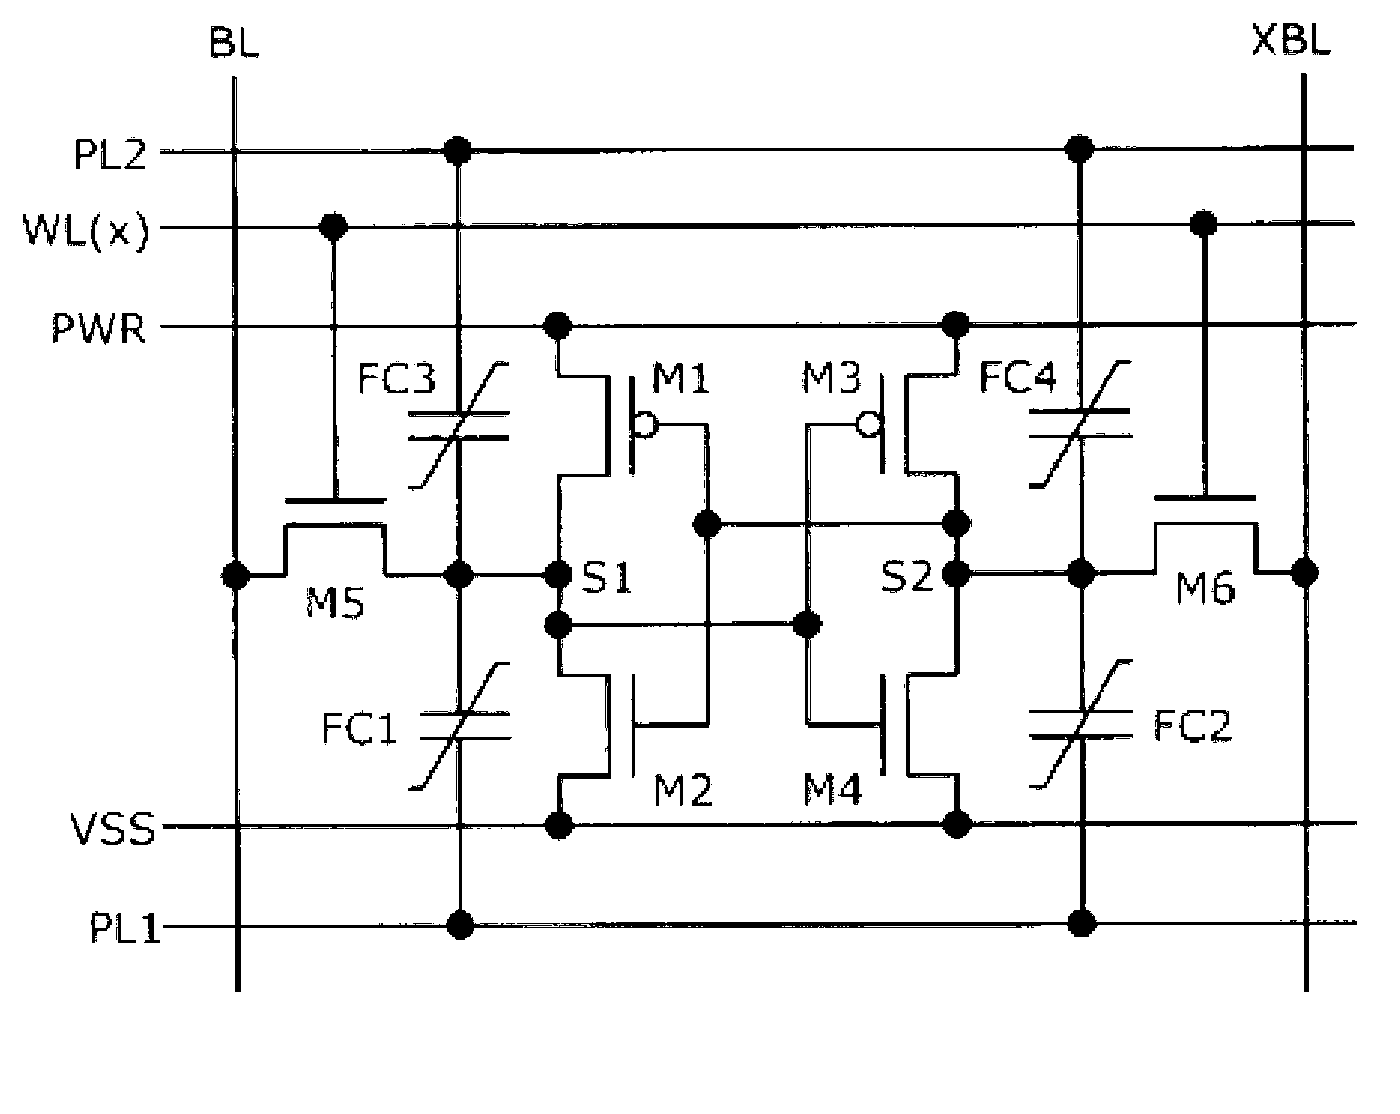 Non-volatile highly-resistant-single-particle configuration memory unit